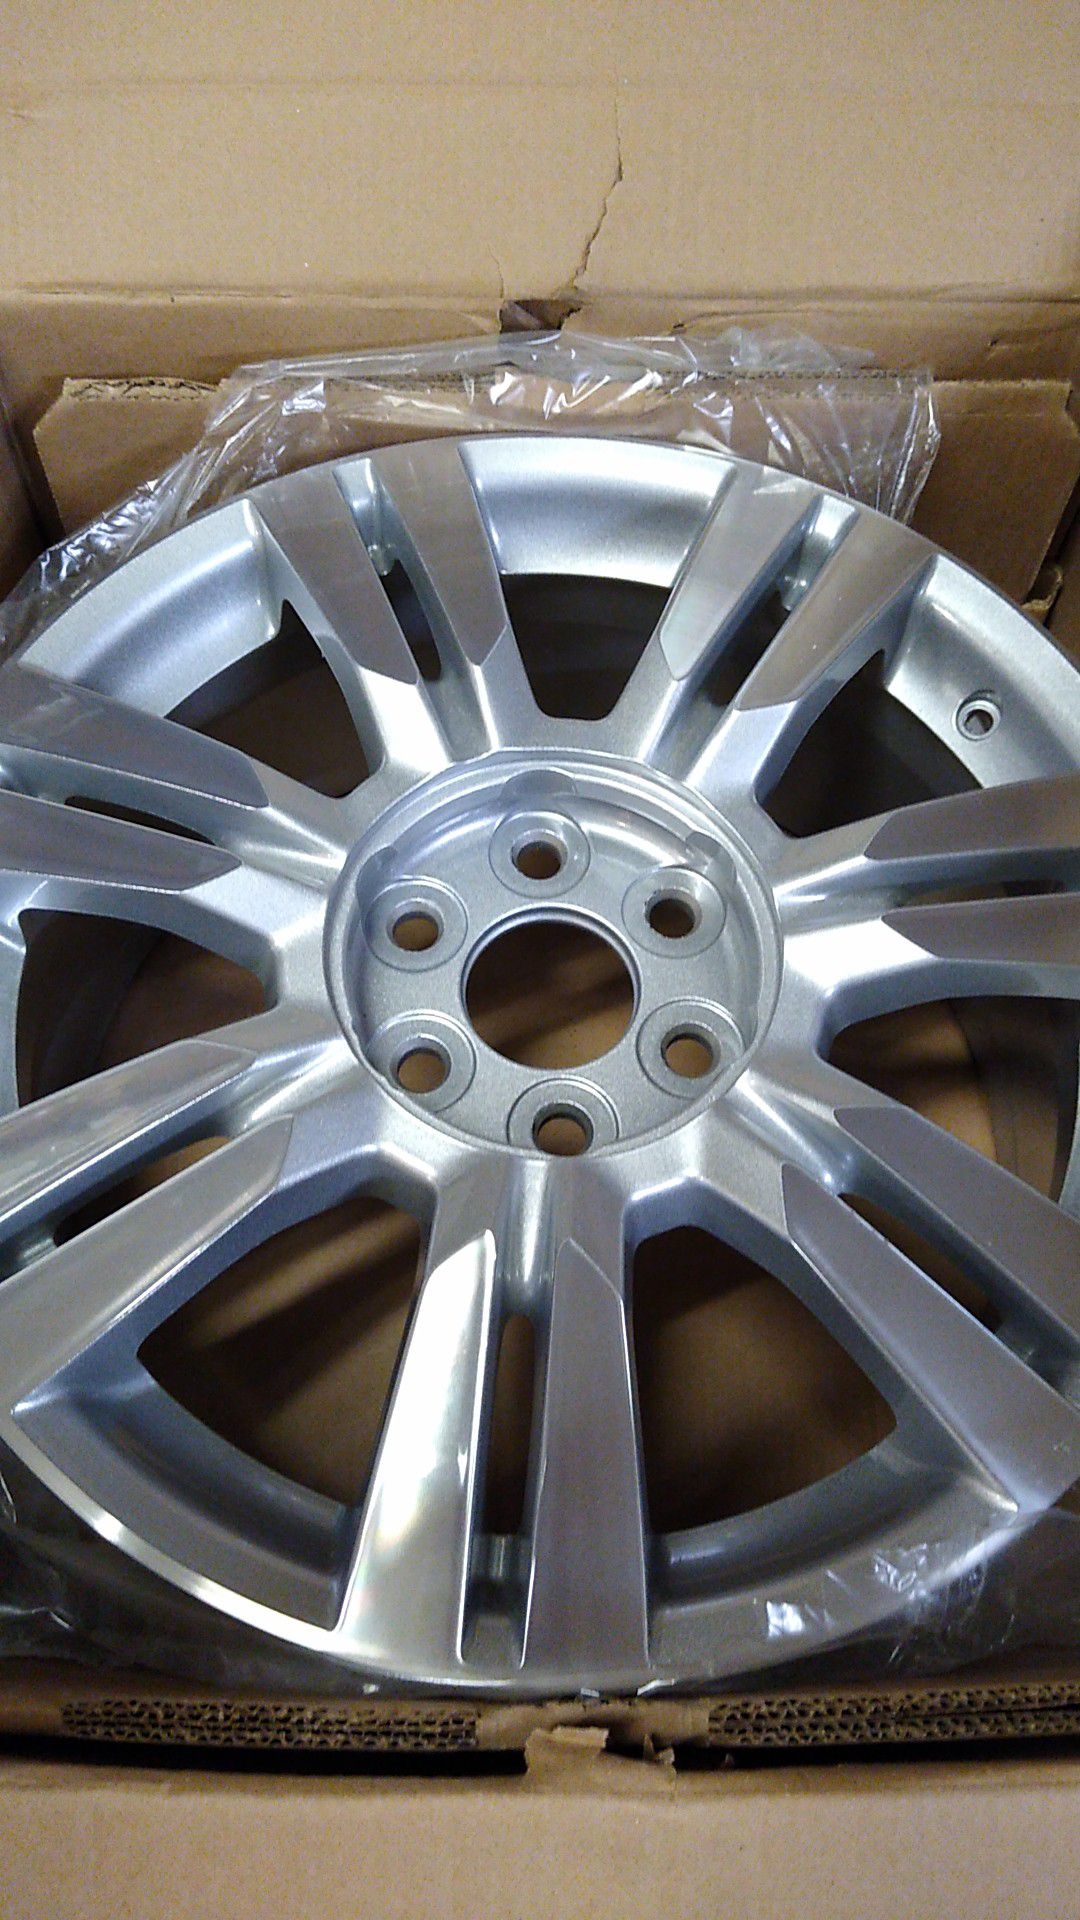 Aluminum Rim 2010 to 2016 Cadillac SRX 18 in Brand New Rim only one